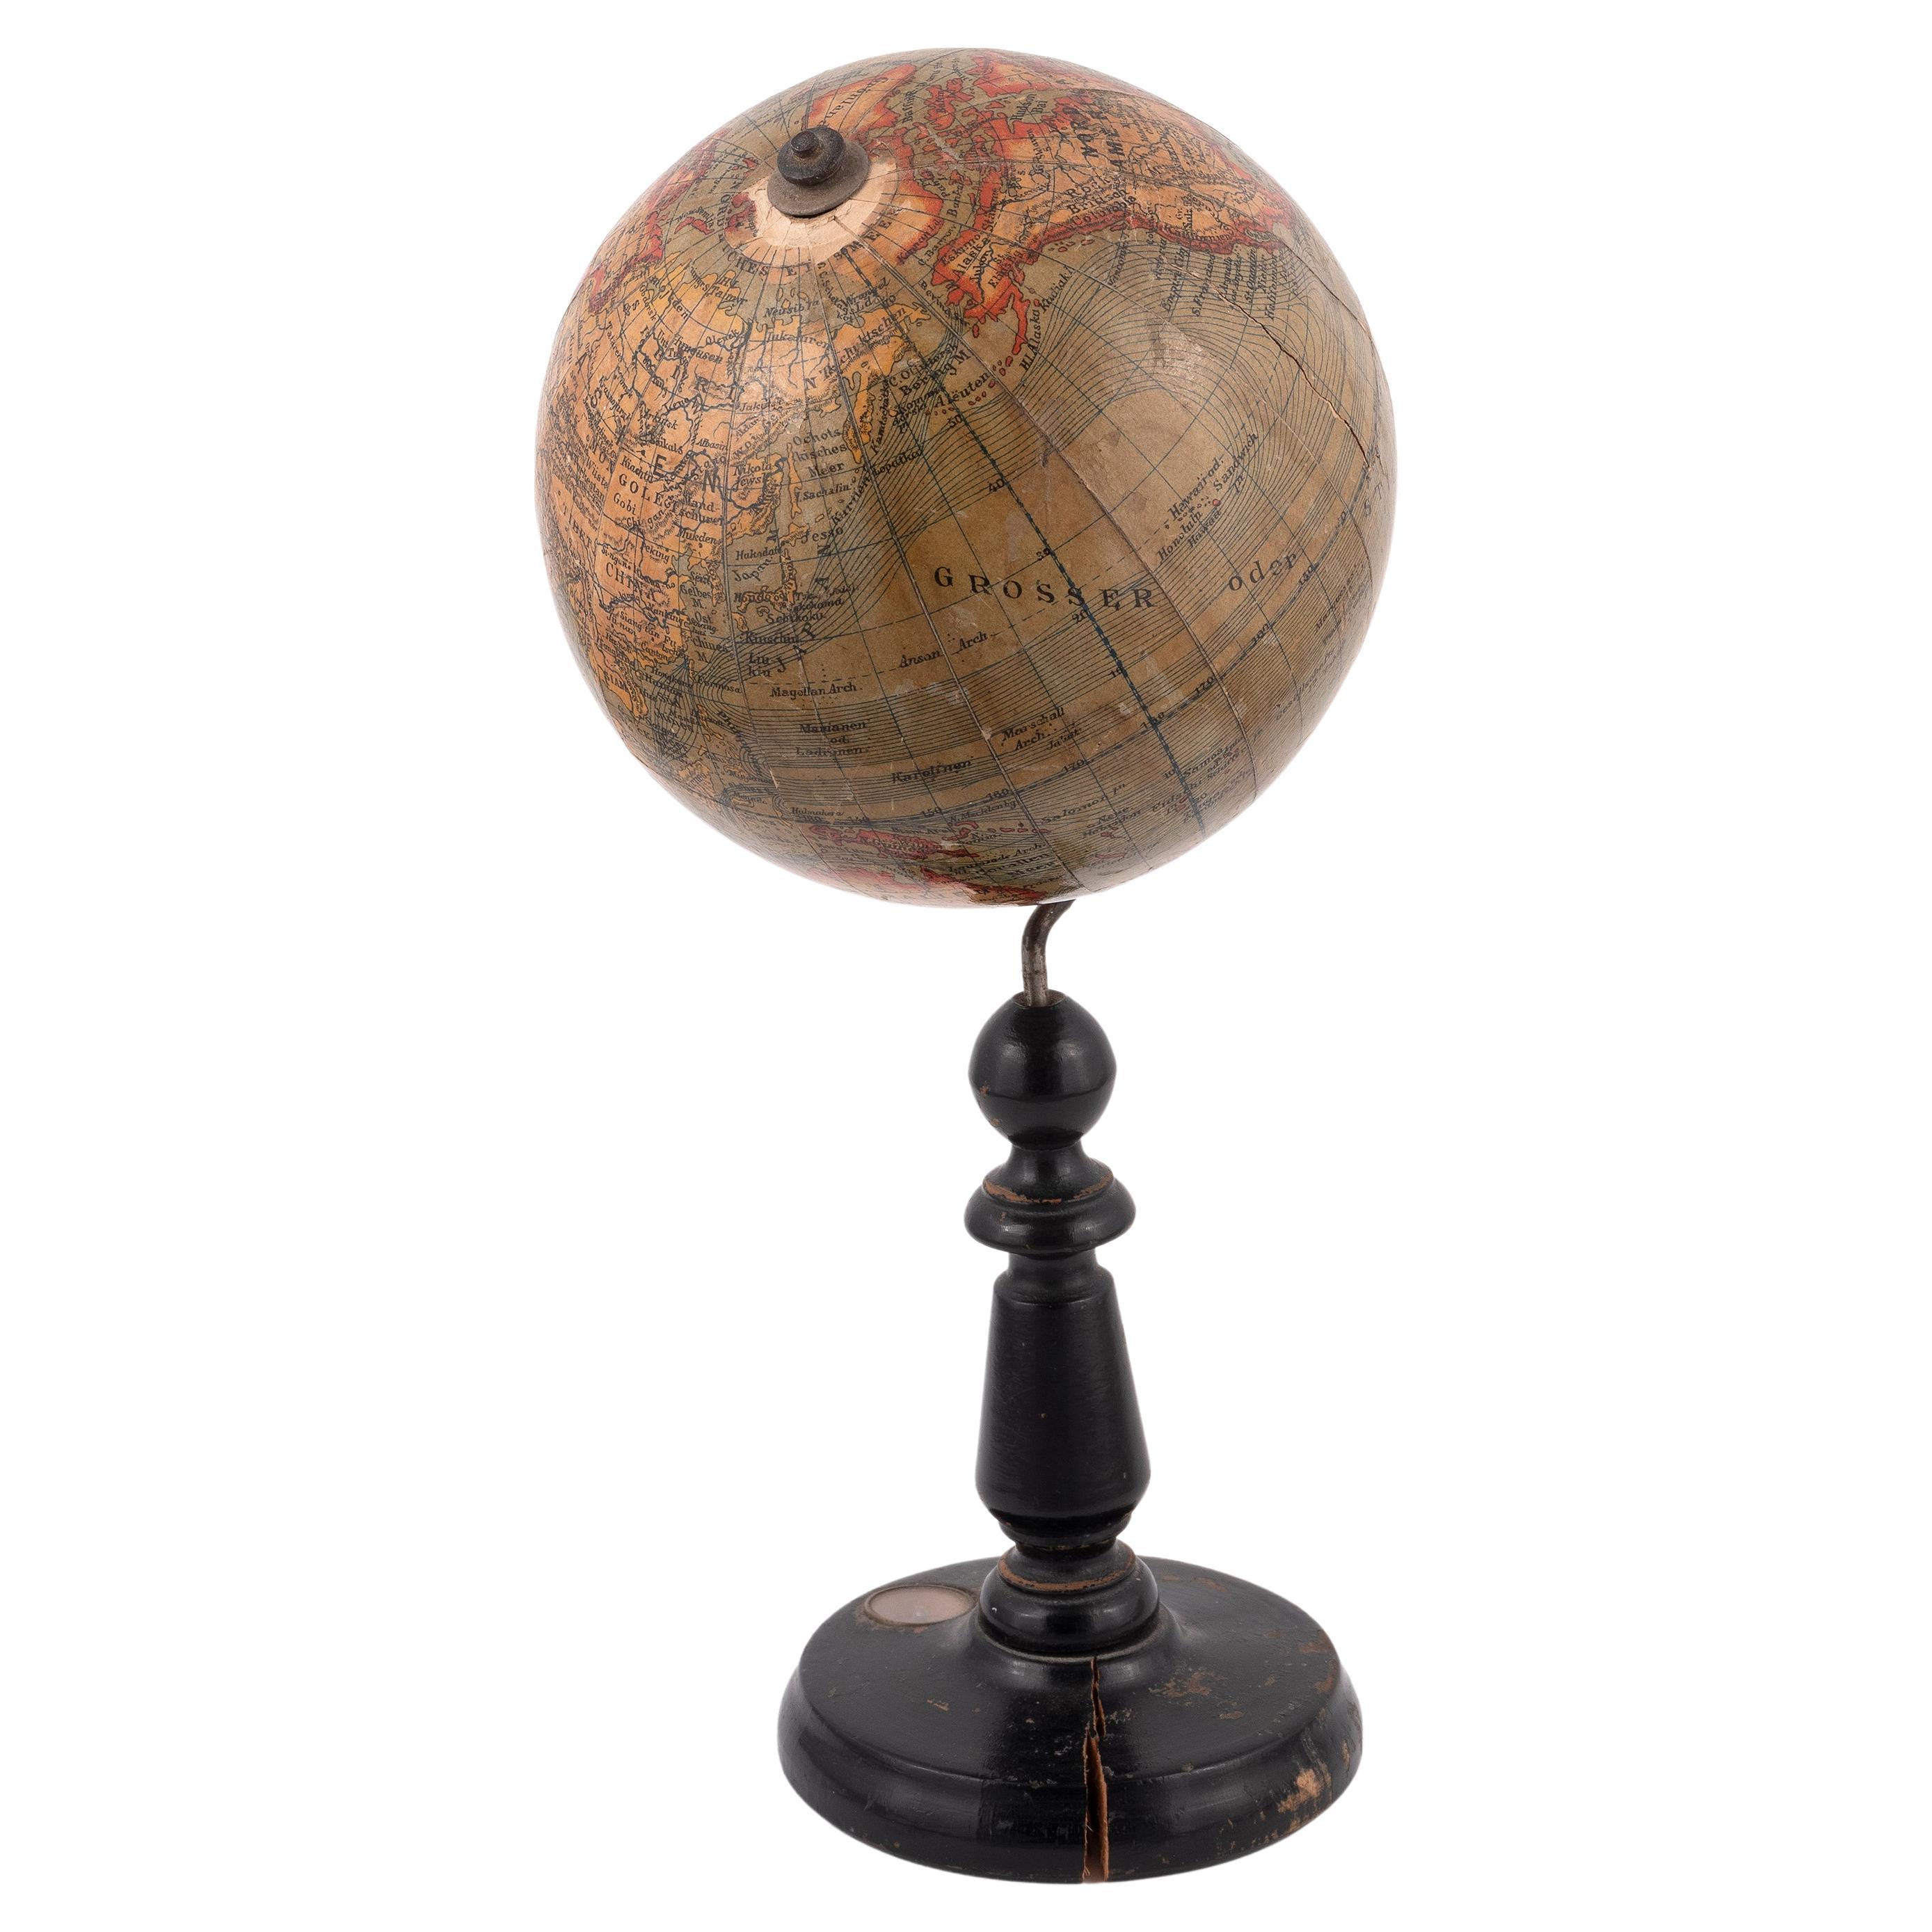 SHIPPING POLICY:
No additional costs will be added to this order.
Shipping costs will be totally covered by the seller (customs duties included). 

On an ebonized base, together with a brass and compass
10in. (22cm.) high 
By Heymann